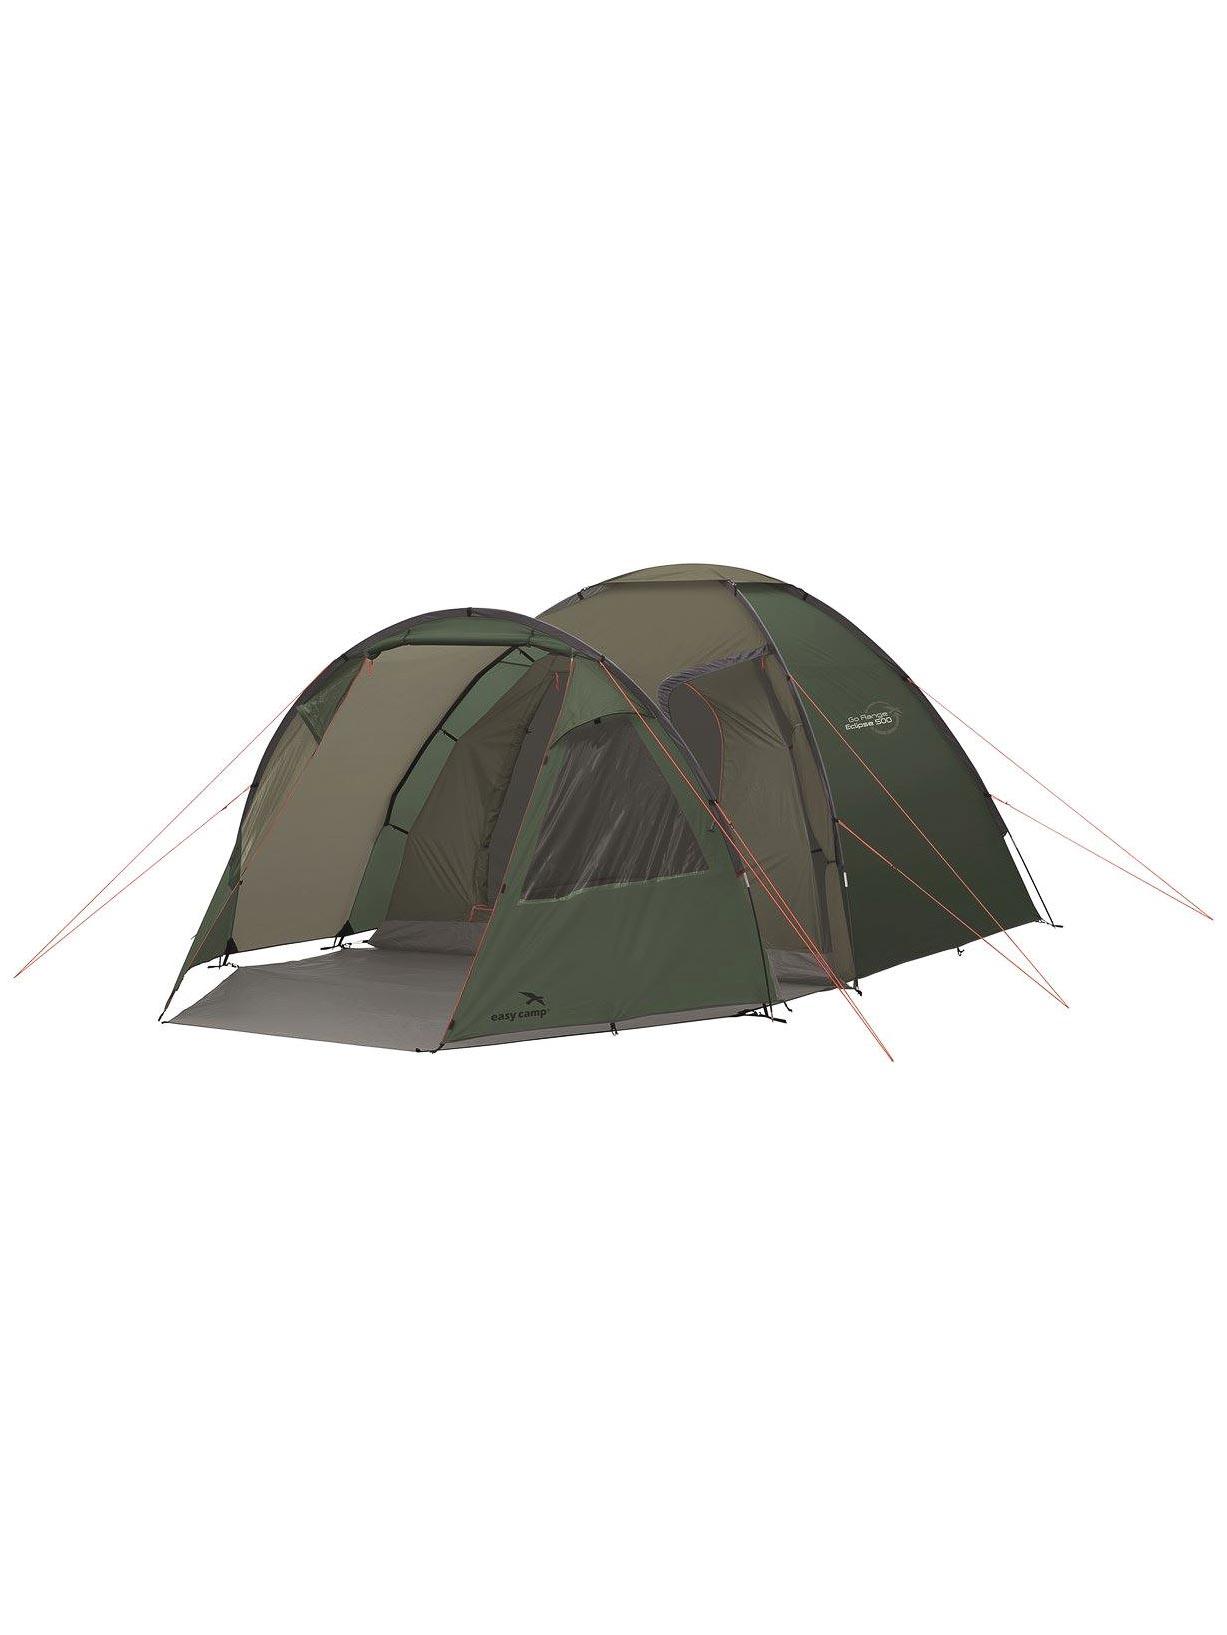 Selected image for EASY CAMP Sator Eclipse 500 Tent zeleni